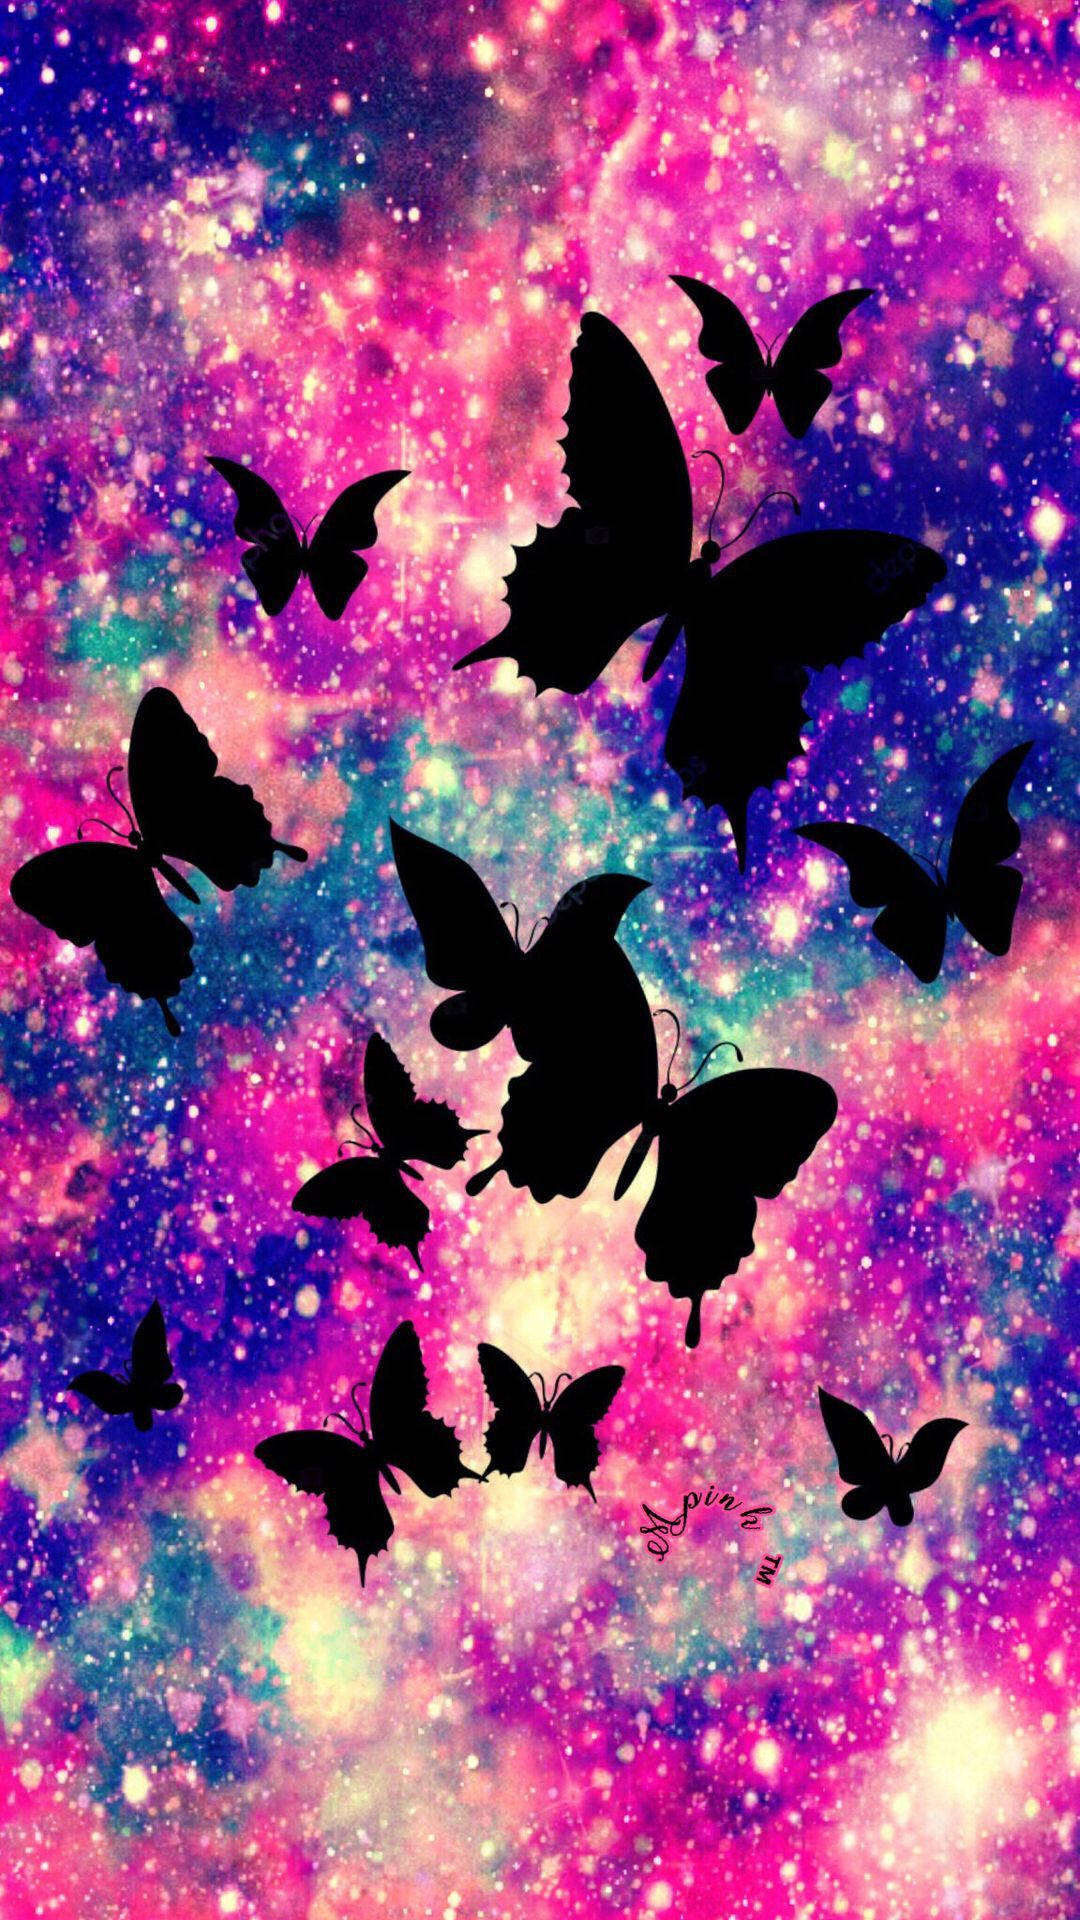 Girly Galaxy With Butterfly Silhouettes Wallpaper